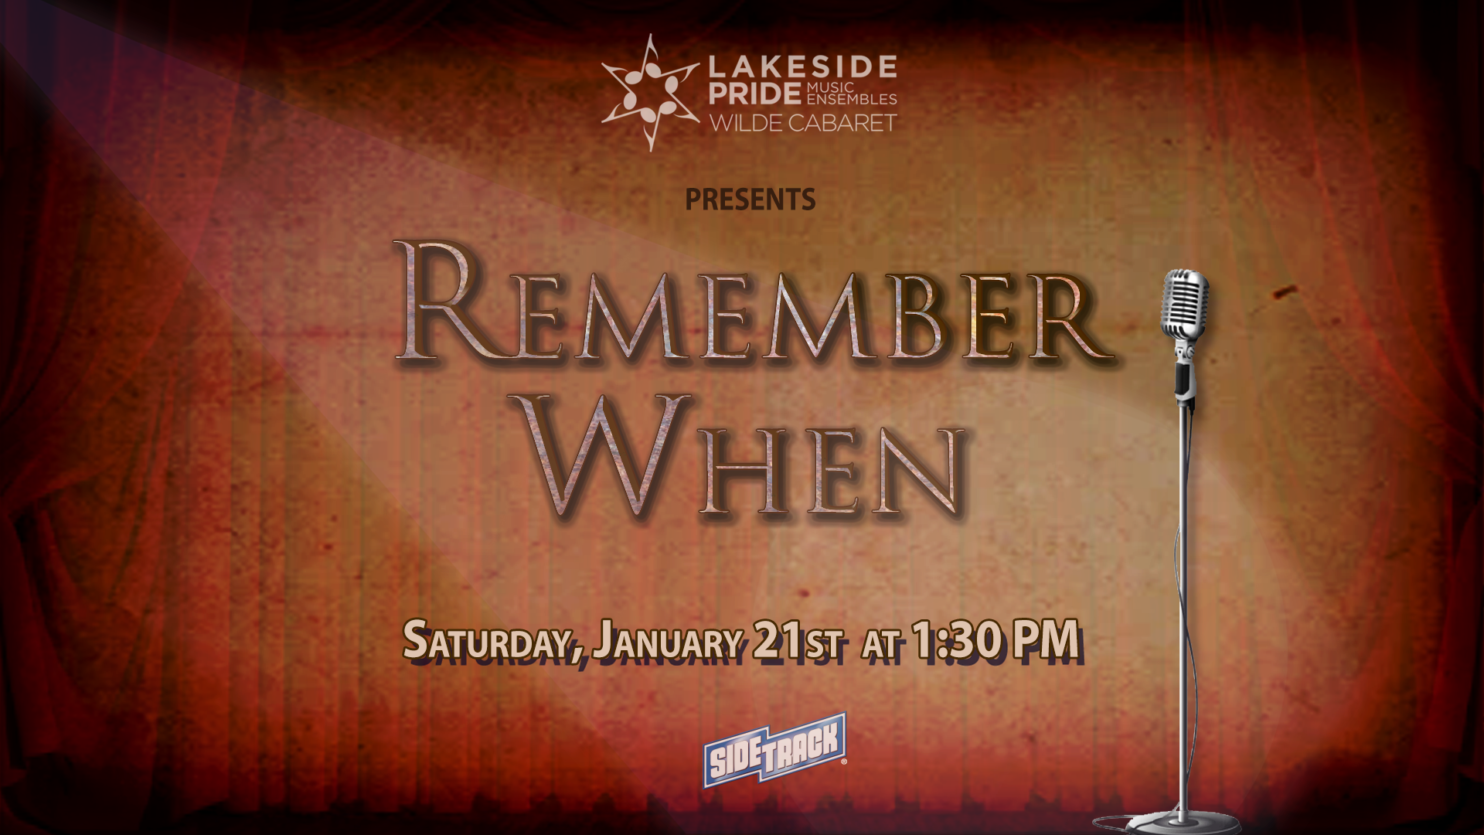 Wilde Cabaret's January Cover Page for show titled "Remember When" placed against a parchment style backdrop with a mike stand present